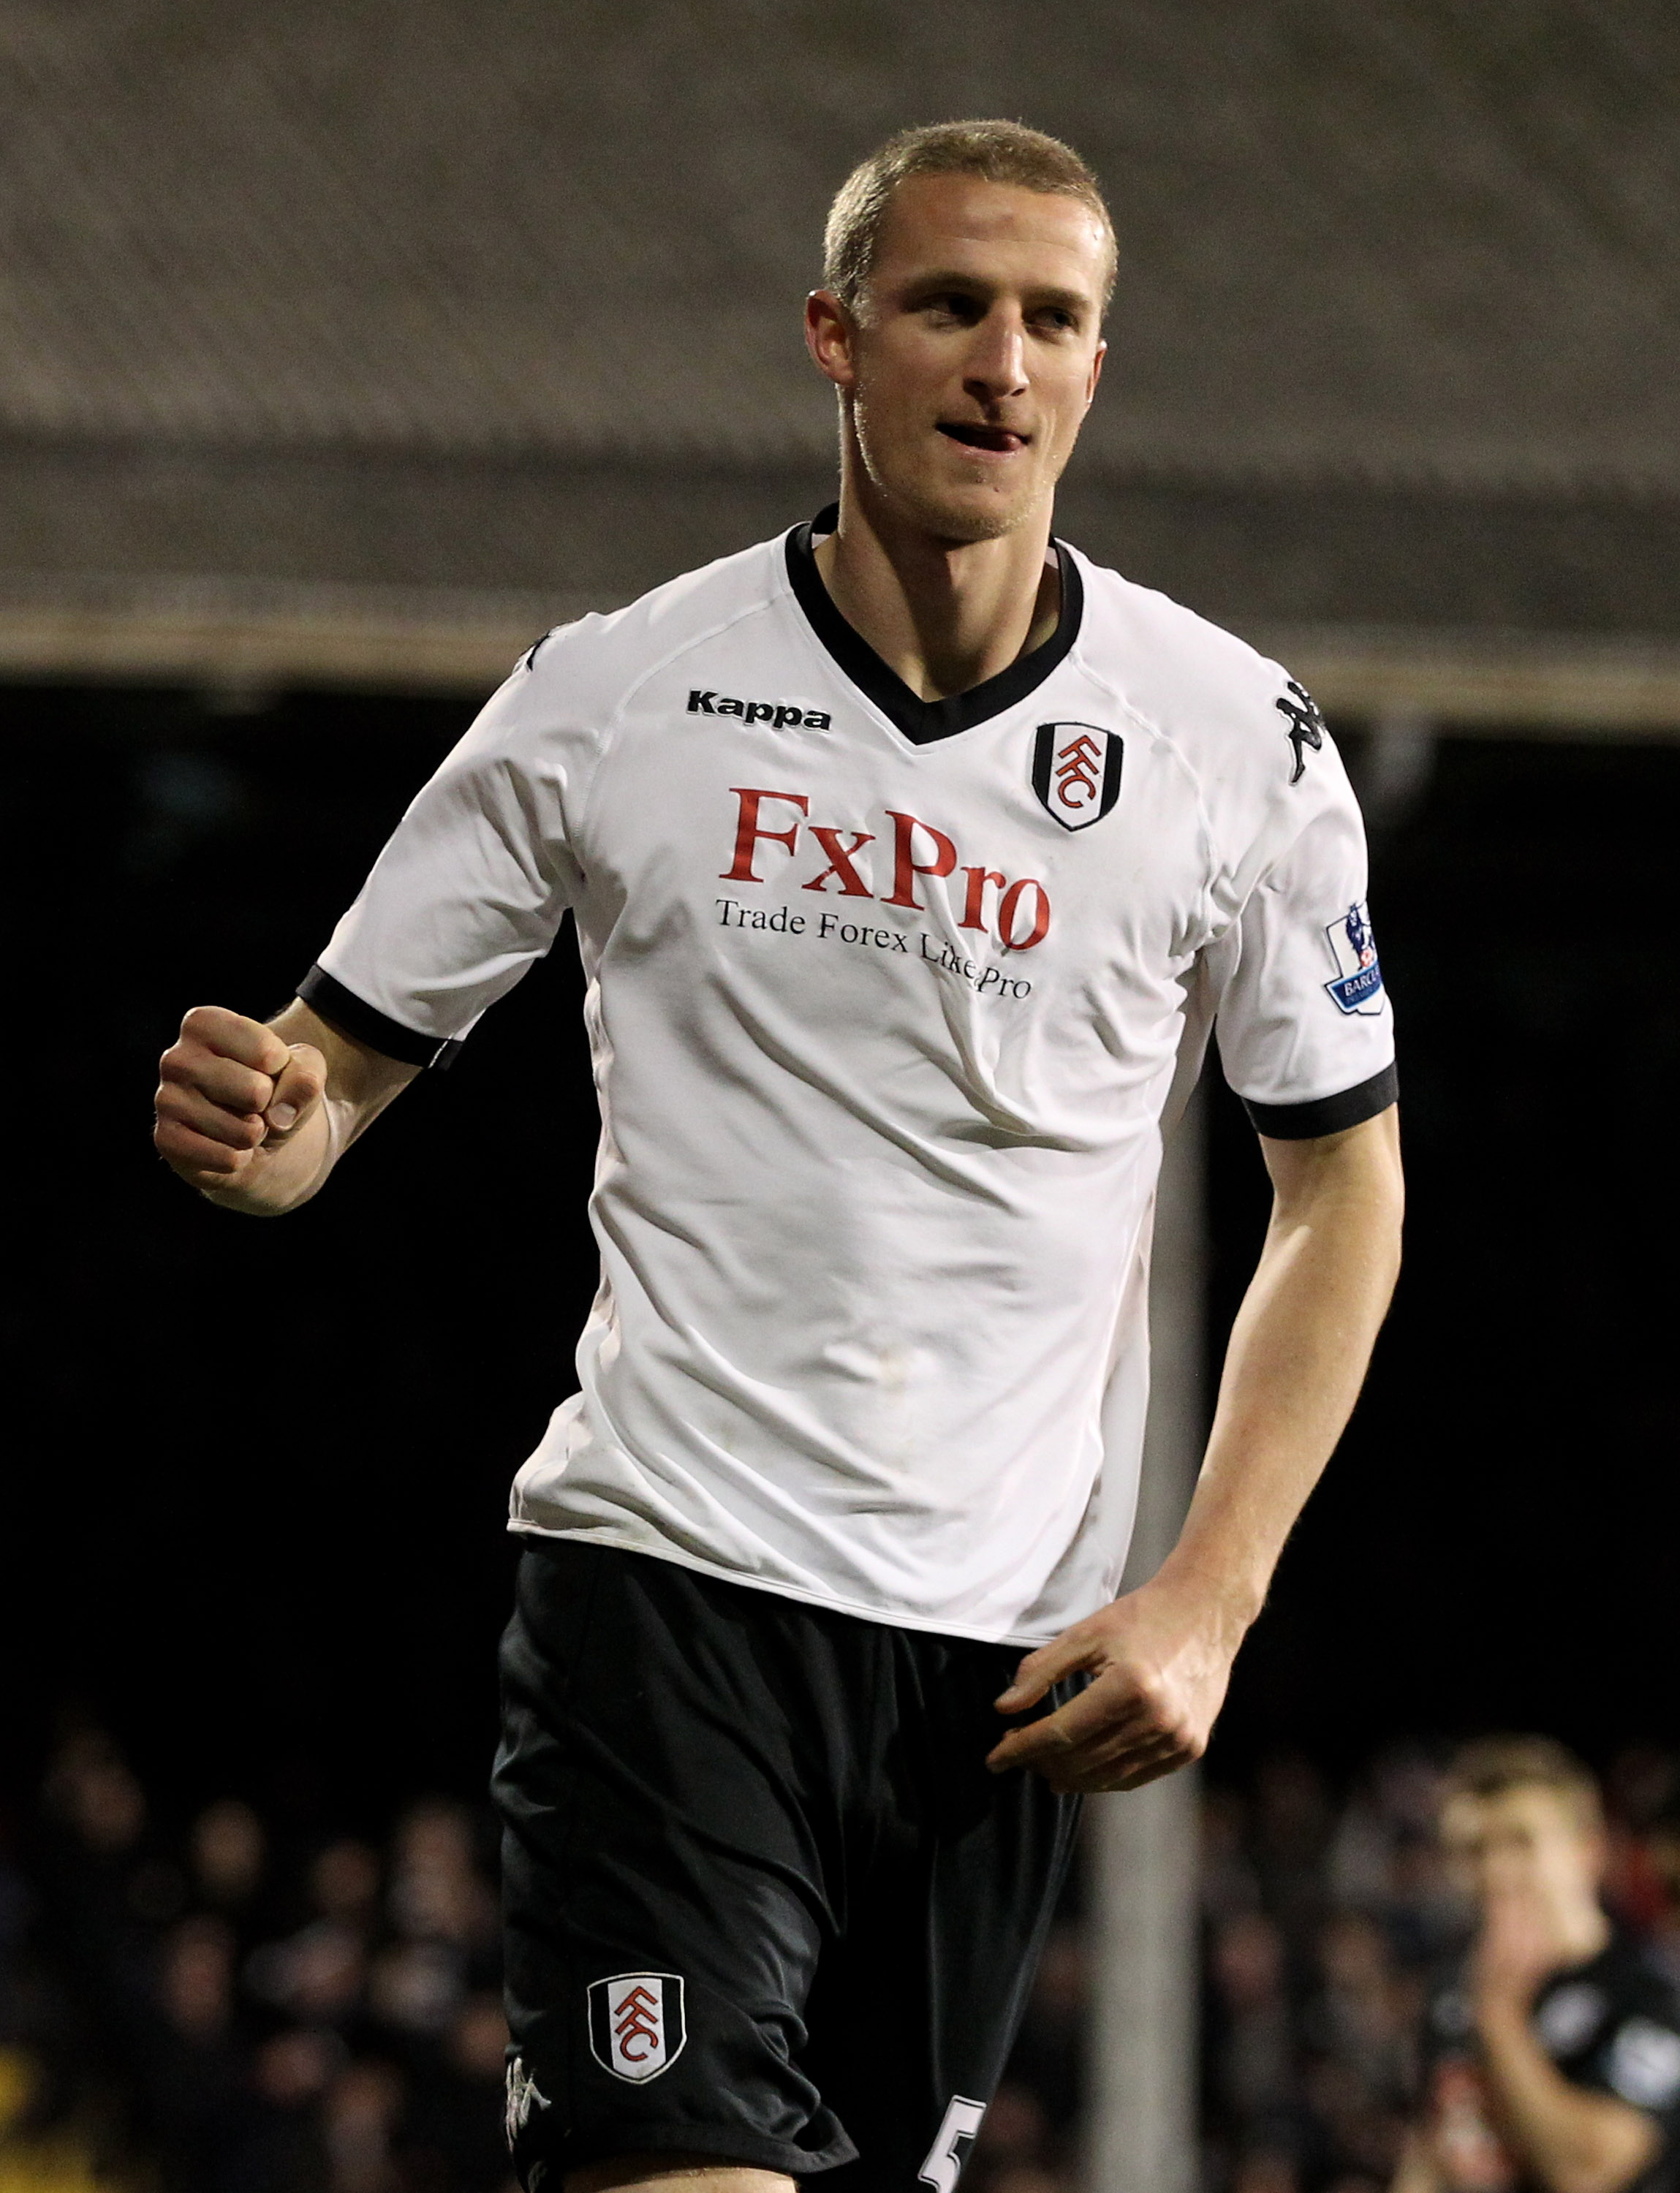 LONDON, ENGLAND - JANUARY 04:  Brede Hangeland of Fulham celebrates after scoring their third goal during the Barclays Premier League match between Fulham and West Bromwich Albion at Craven Cottage on January 4, 2011 in London, England.  (Photo by Scott H